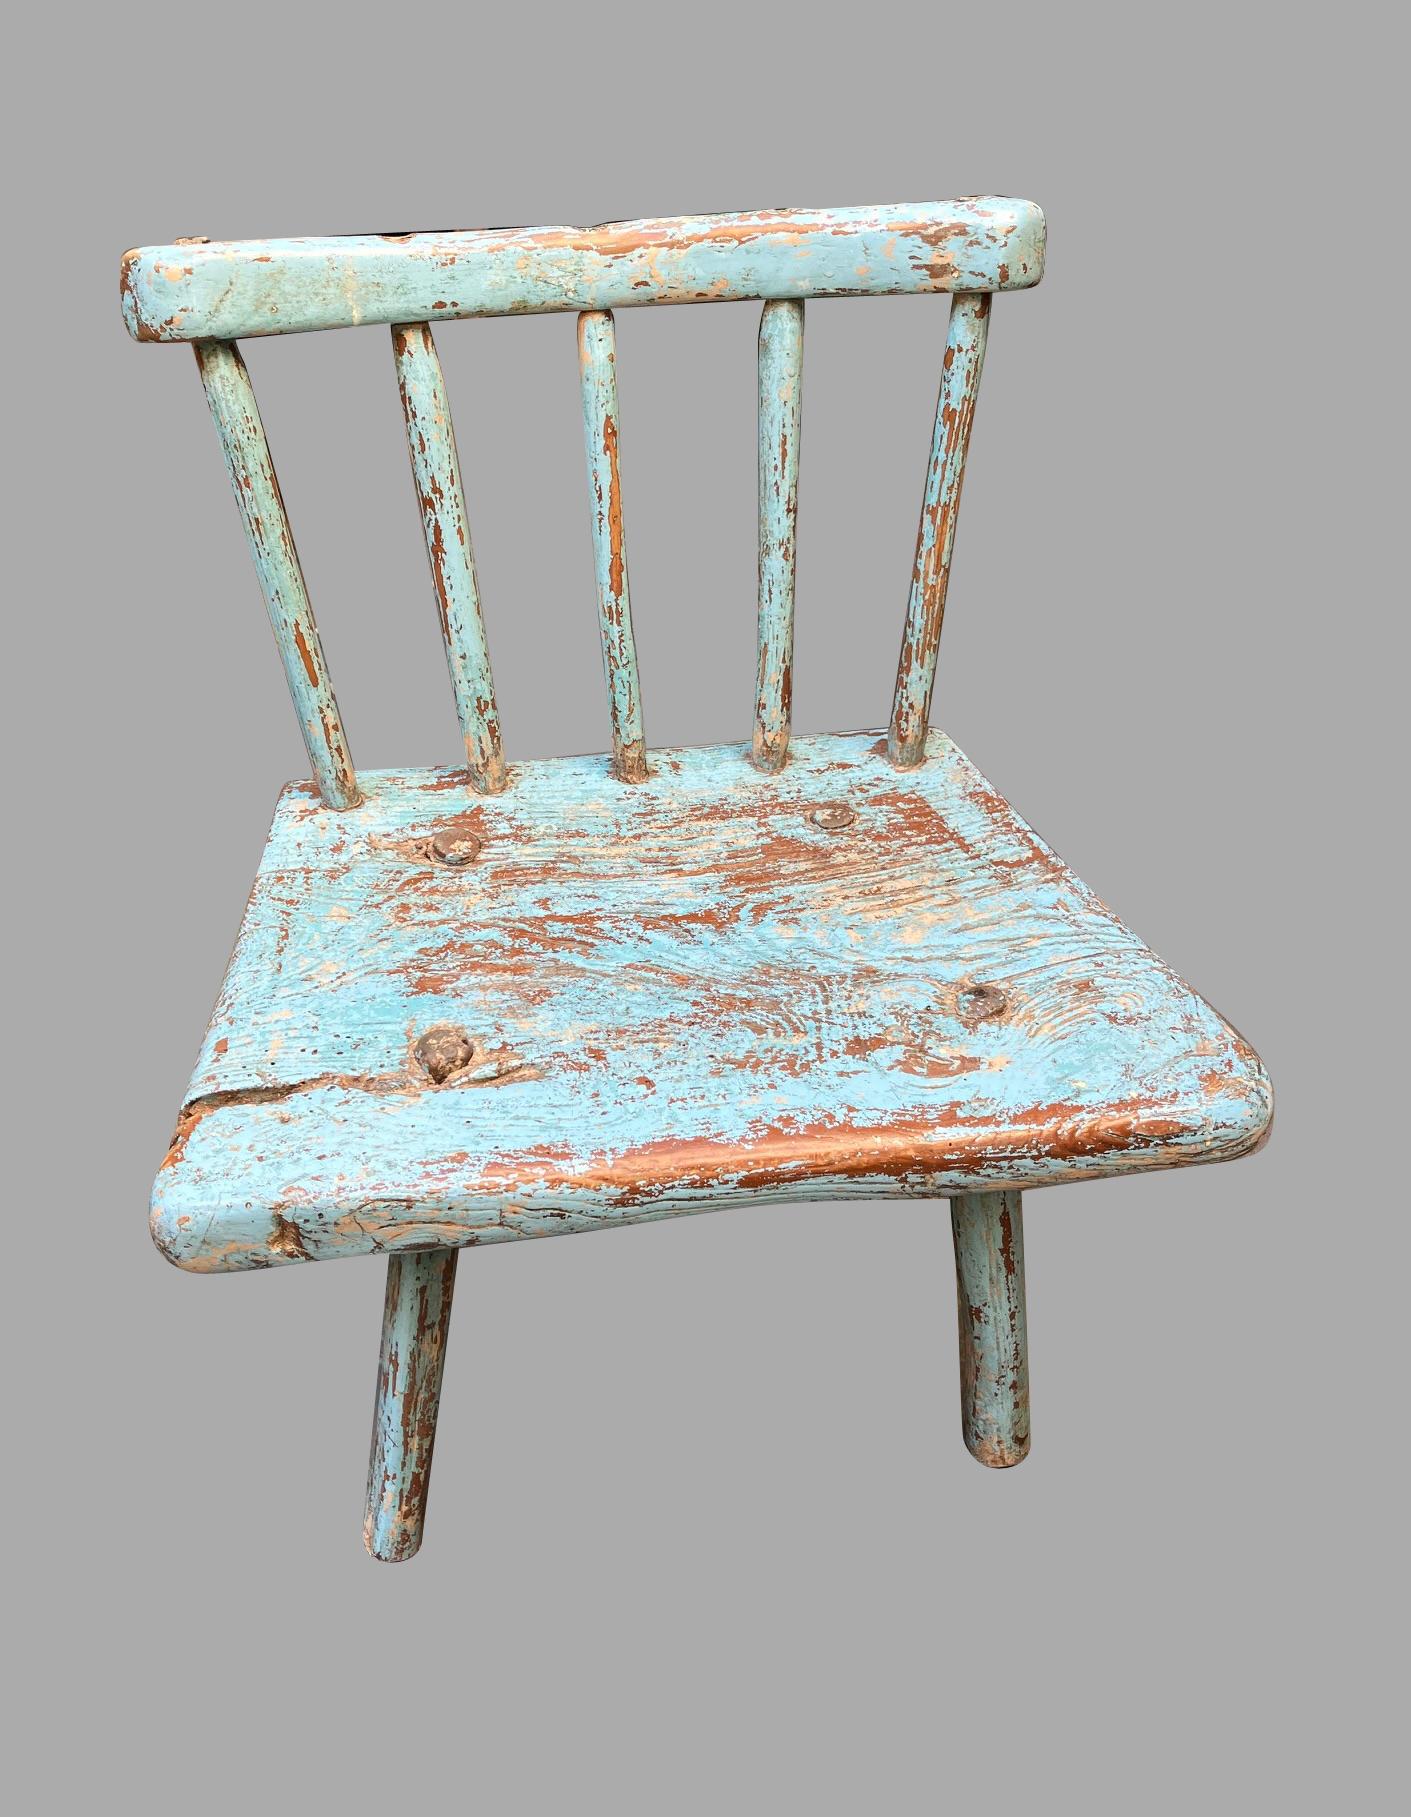 An unusual and charming English provincial child's windsor armchair retaining its original light blue paint, of simple form with a curved crestrail, supported by 5 spindles supported on round legs. One rear leg probably of a later date. Shows